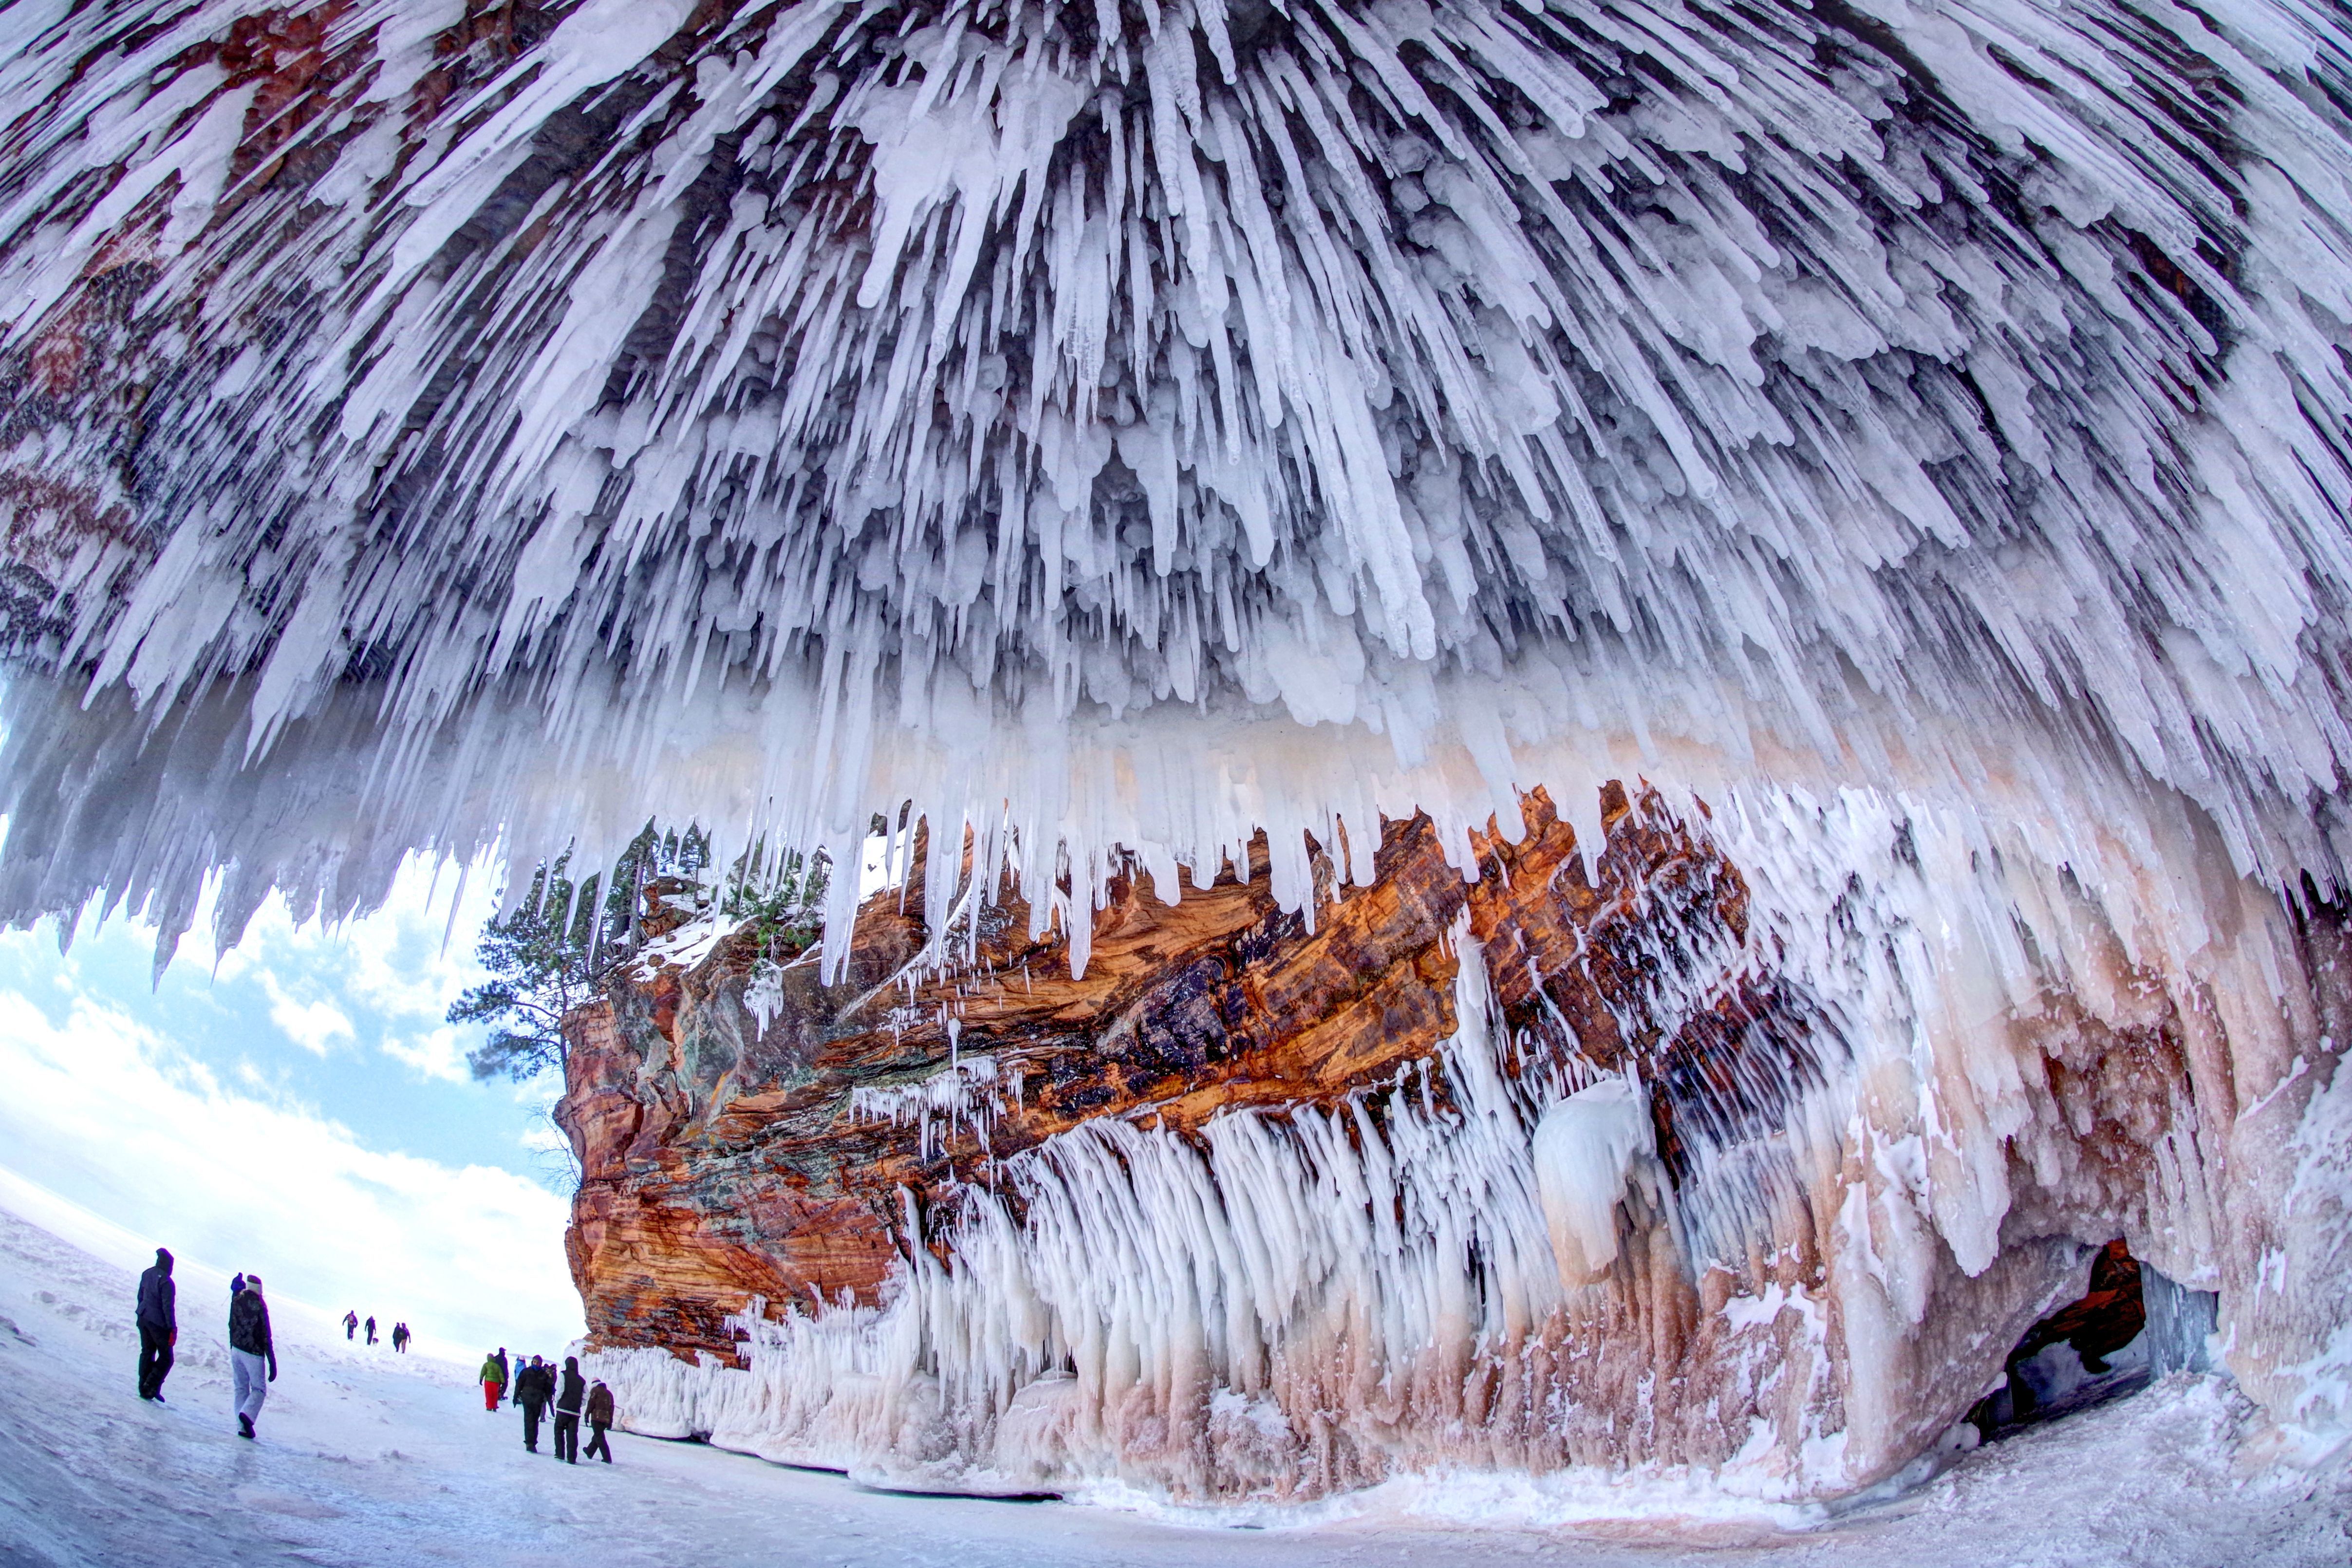 1st Place "Shark Jaw Ice Cave" by Steve Bensing